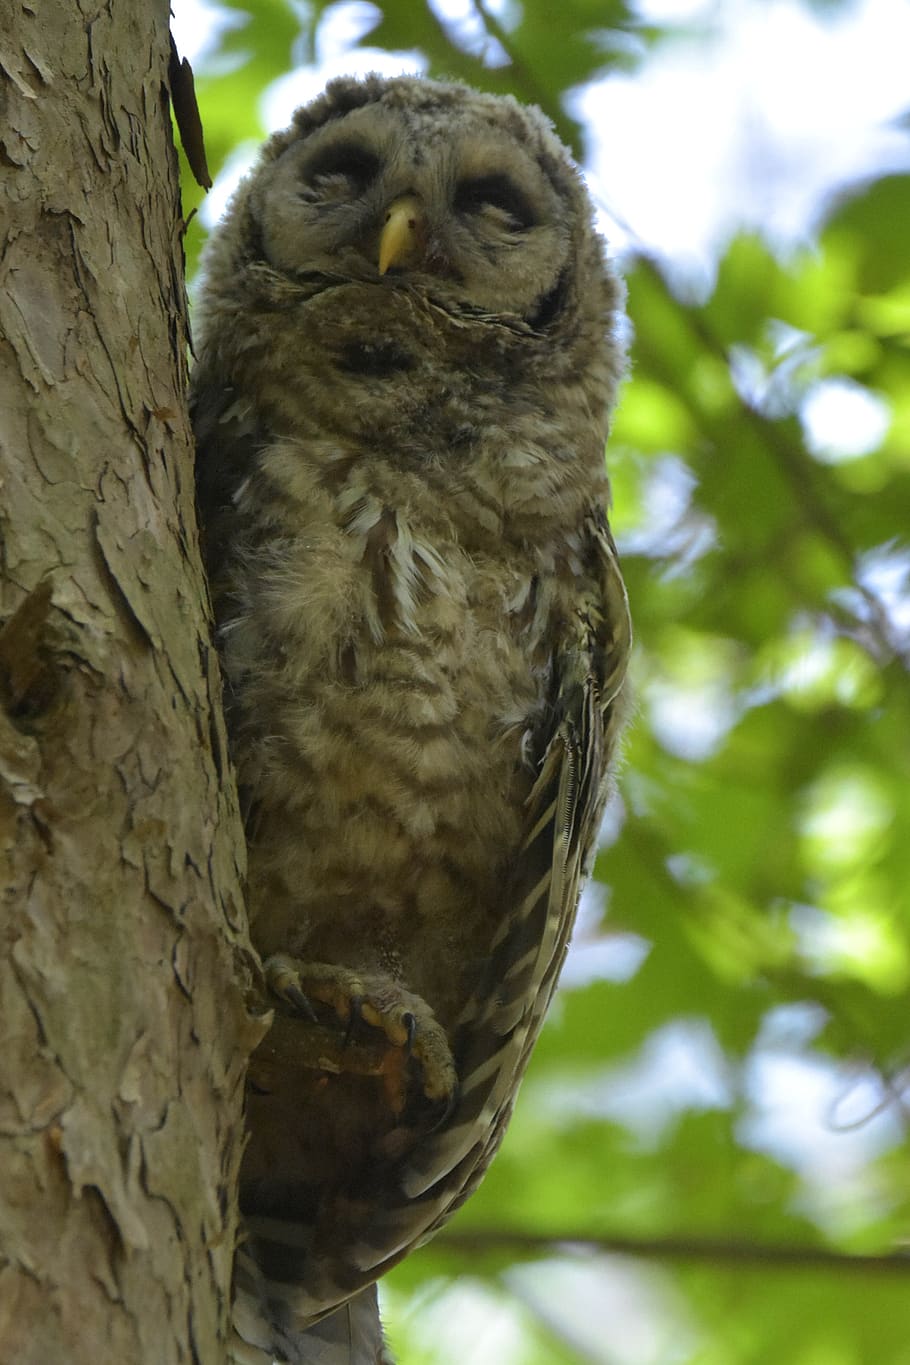 juvenile barred owl, taking a nap, perched on a tiny branch, blurred leaves background, animal themes, animal, one animal, vertebrate, tree, animals in the wild